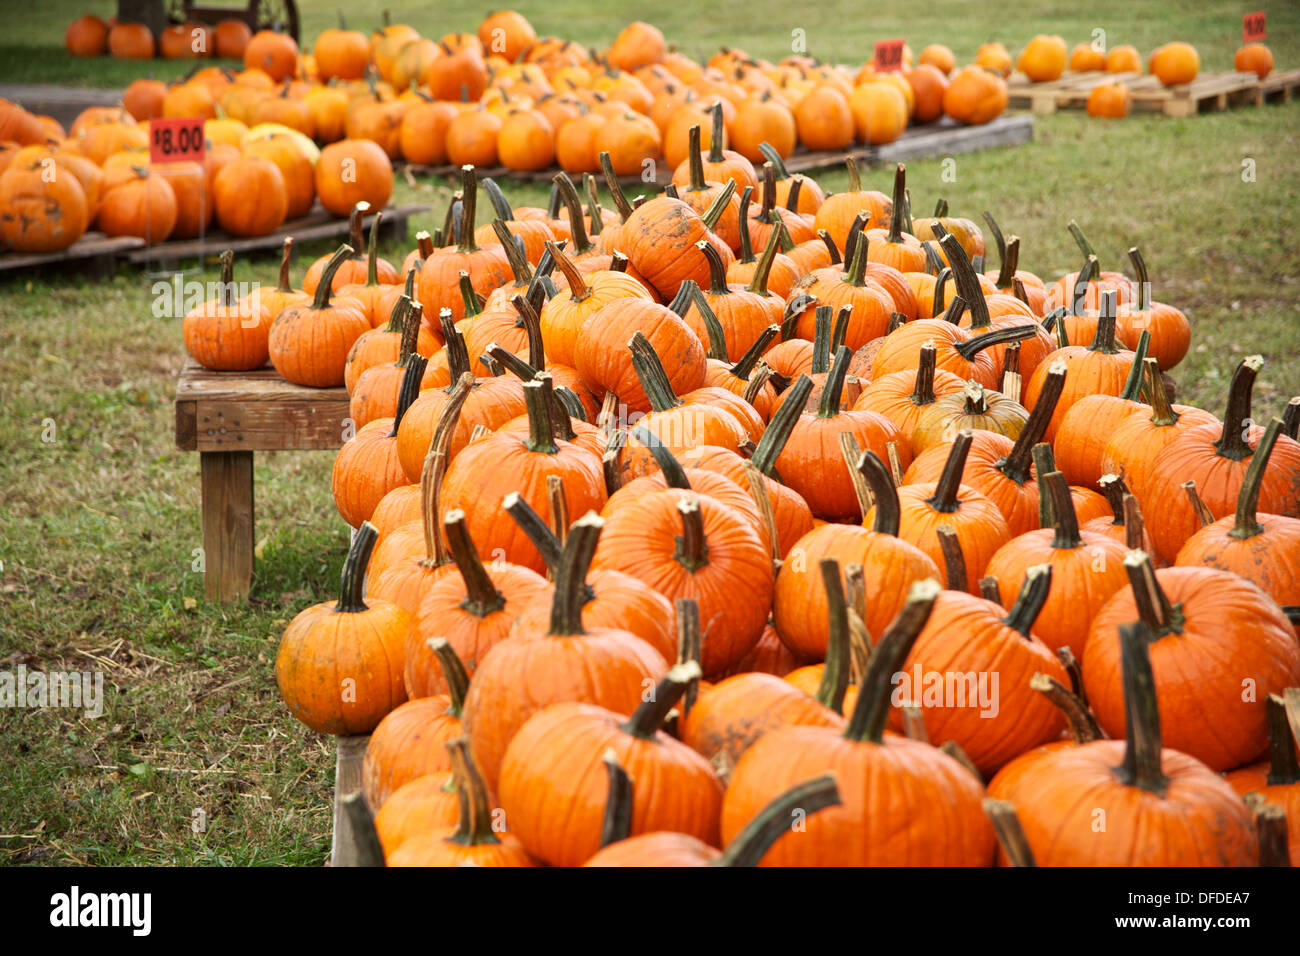 Multiple pumpkins on display for sail at a farmers market festival in the fall. Stock Photo